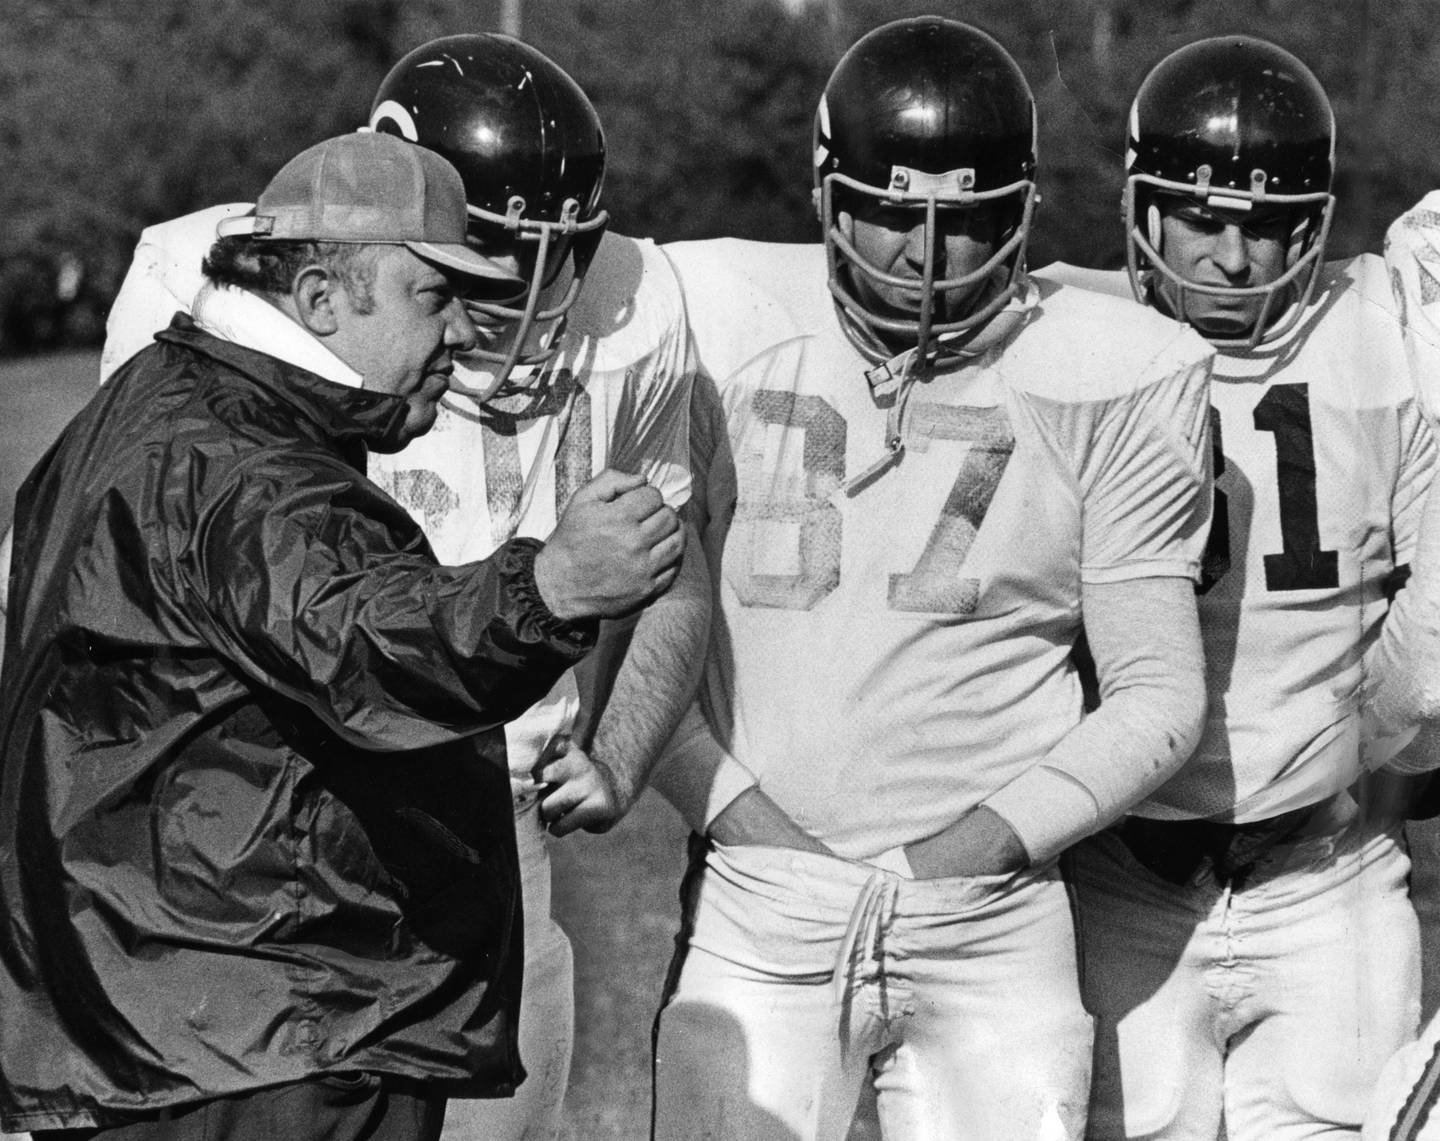 Bears coach Abe Gibron gives some tips to, from left, Bill Stahley, Steve DeLong and Ross Brupbacher on Oct. 25, 1972.